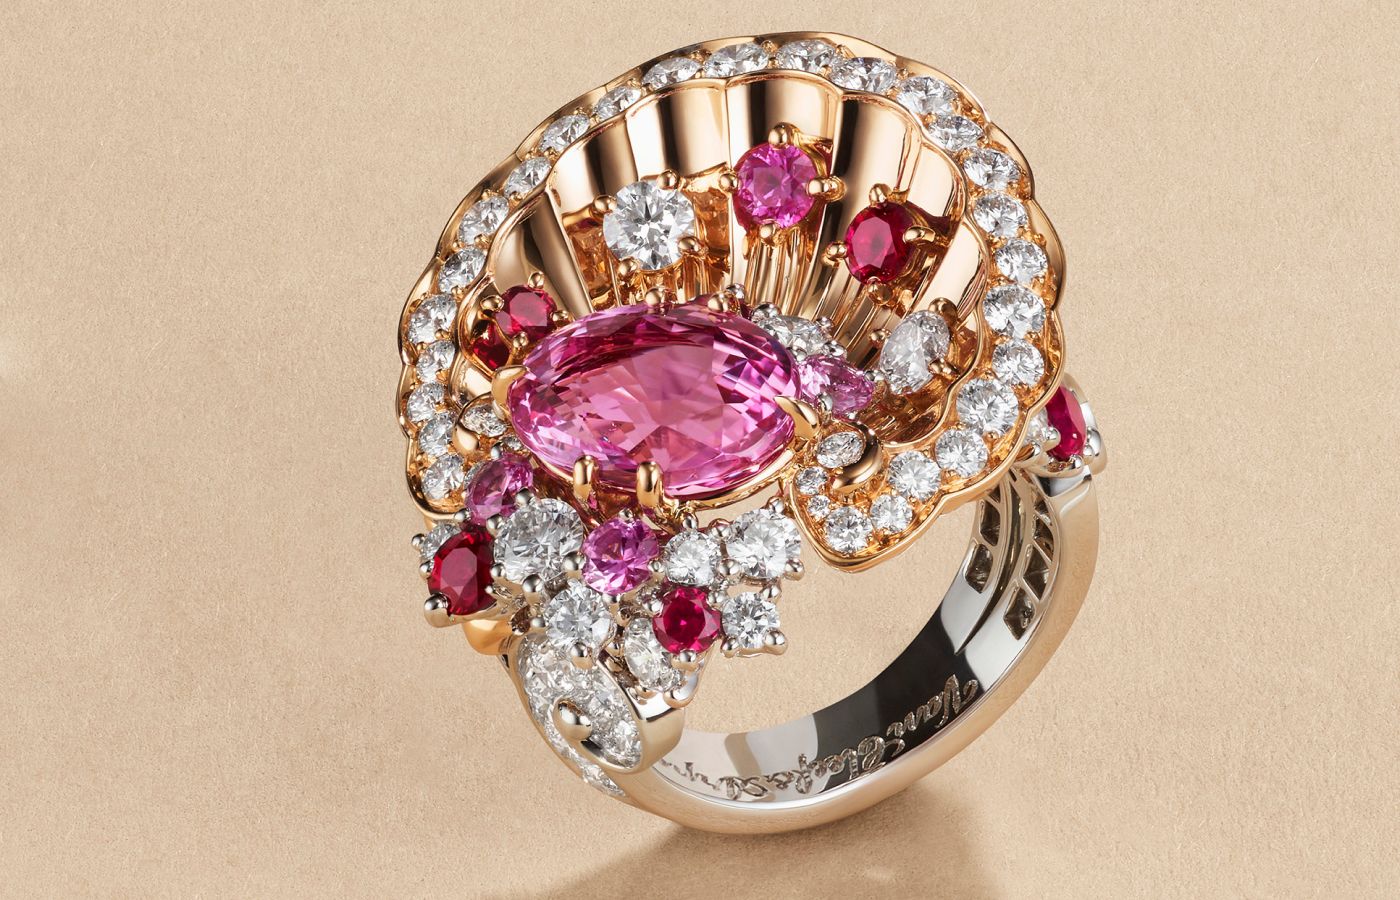 Van Cleef & Arpels Ode à l’Amour ring in rose gold, white gold, a 4.04-ct oval-cut pink sapphire, rubies, pink sapphires and diamonds from Le Grand Tour High Jewellery collection